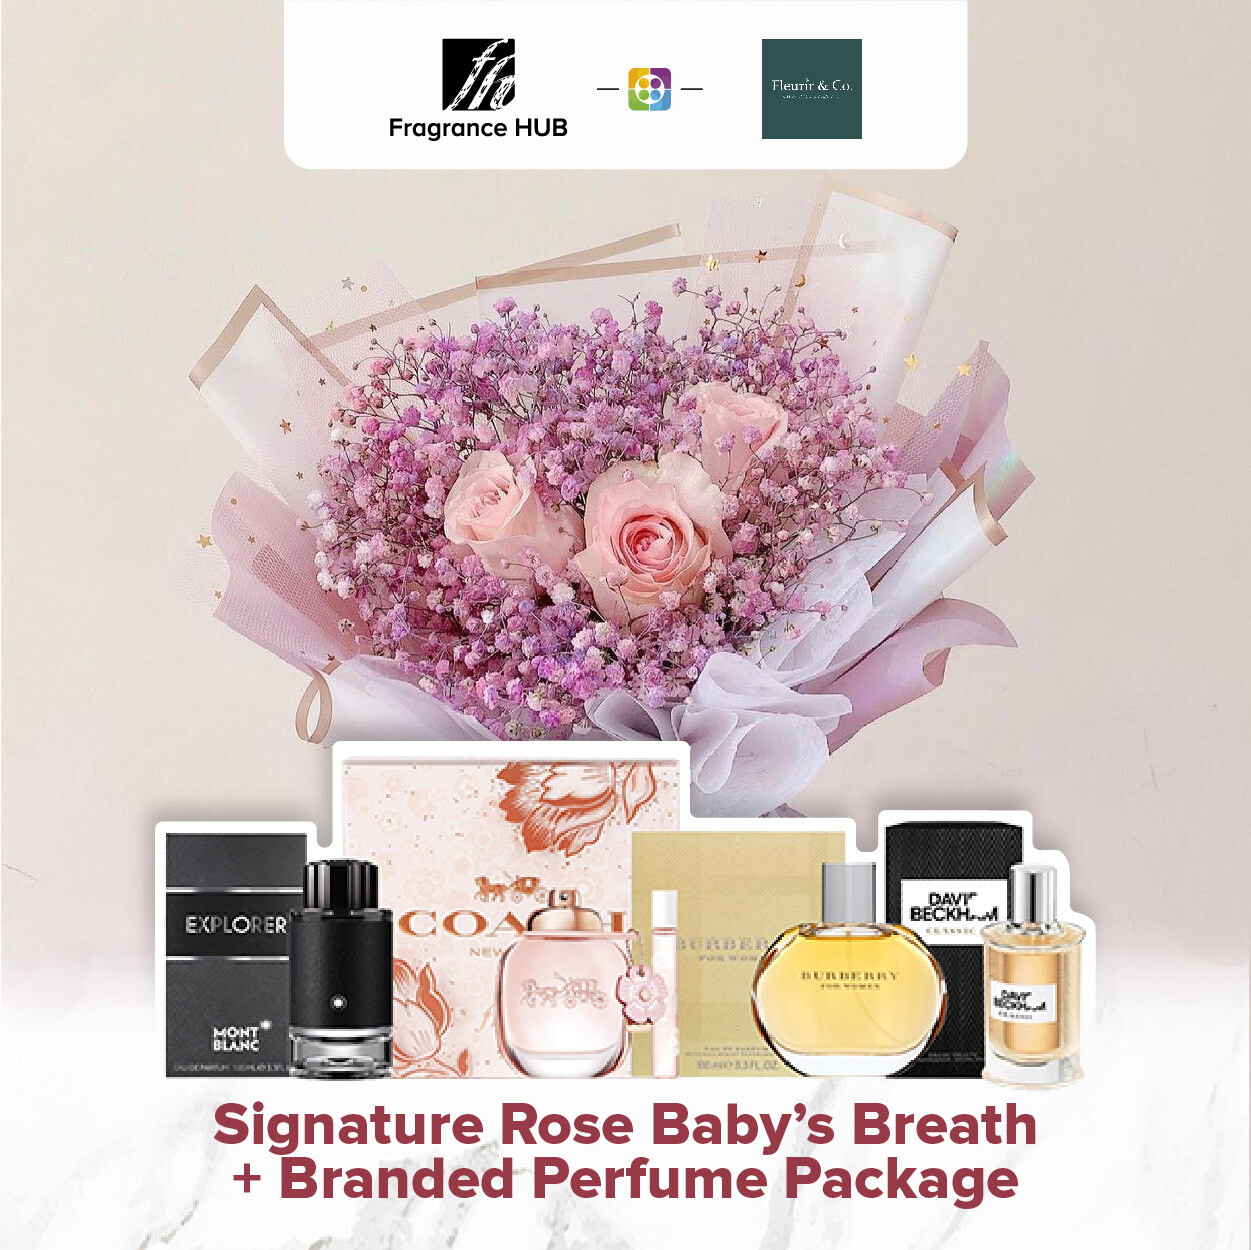 Signature Rose Baby’s Breath + Fragrance Hub Branded Perfume (By: Fleurir & Co from Kuching)